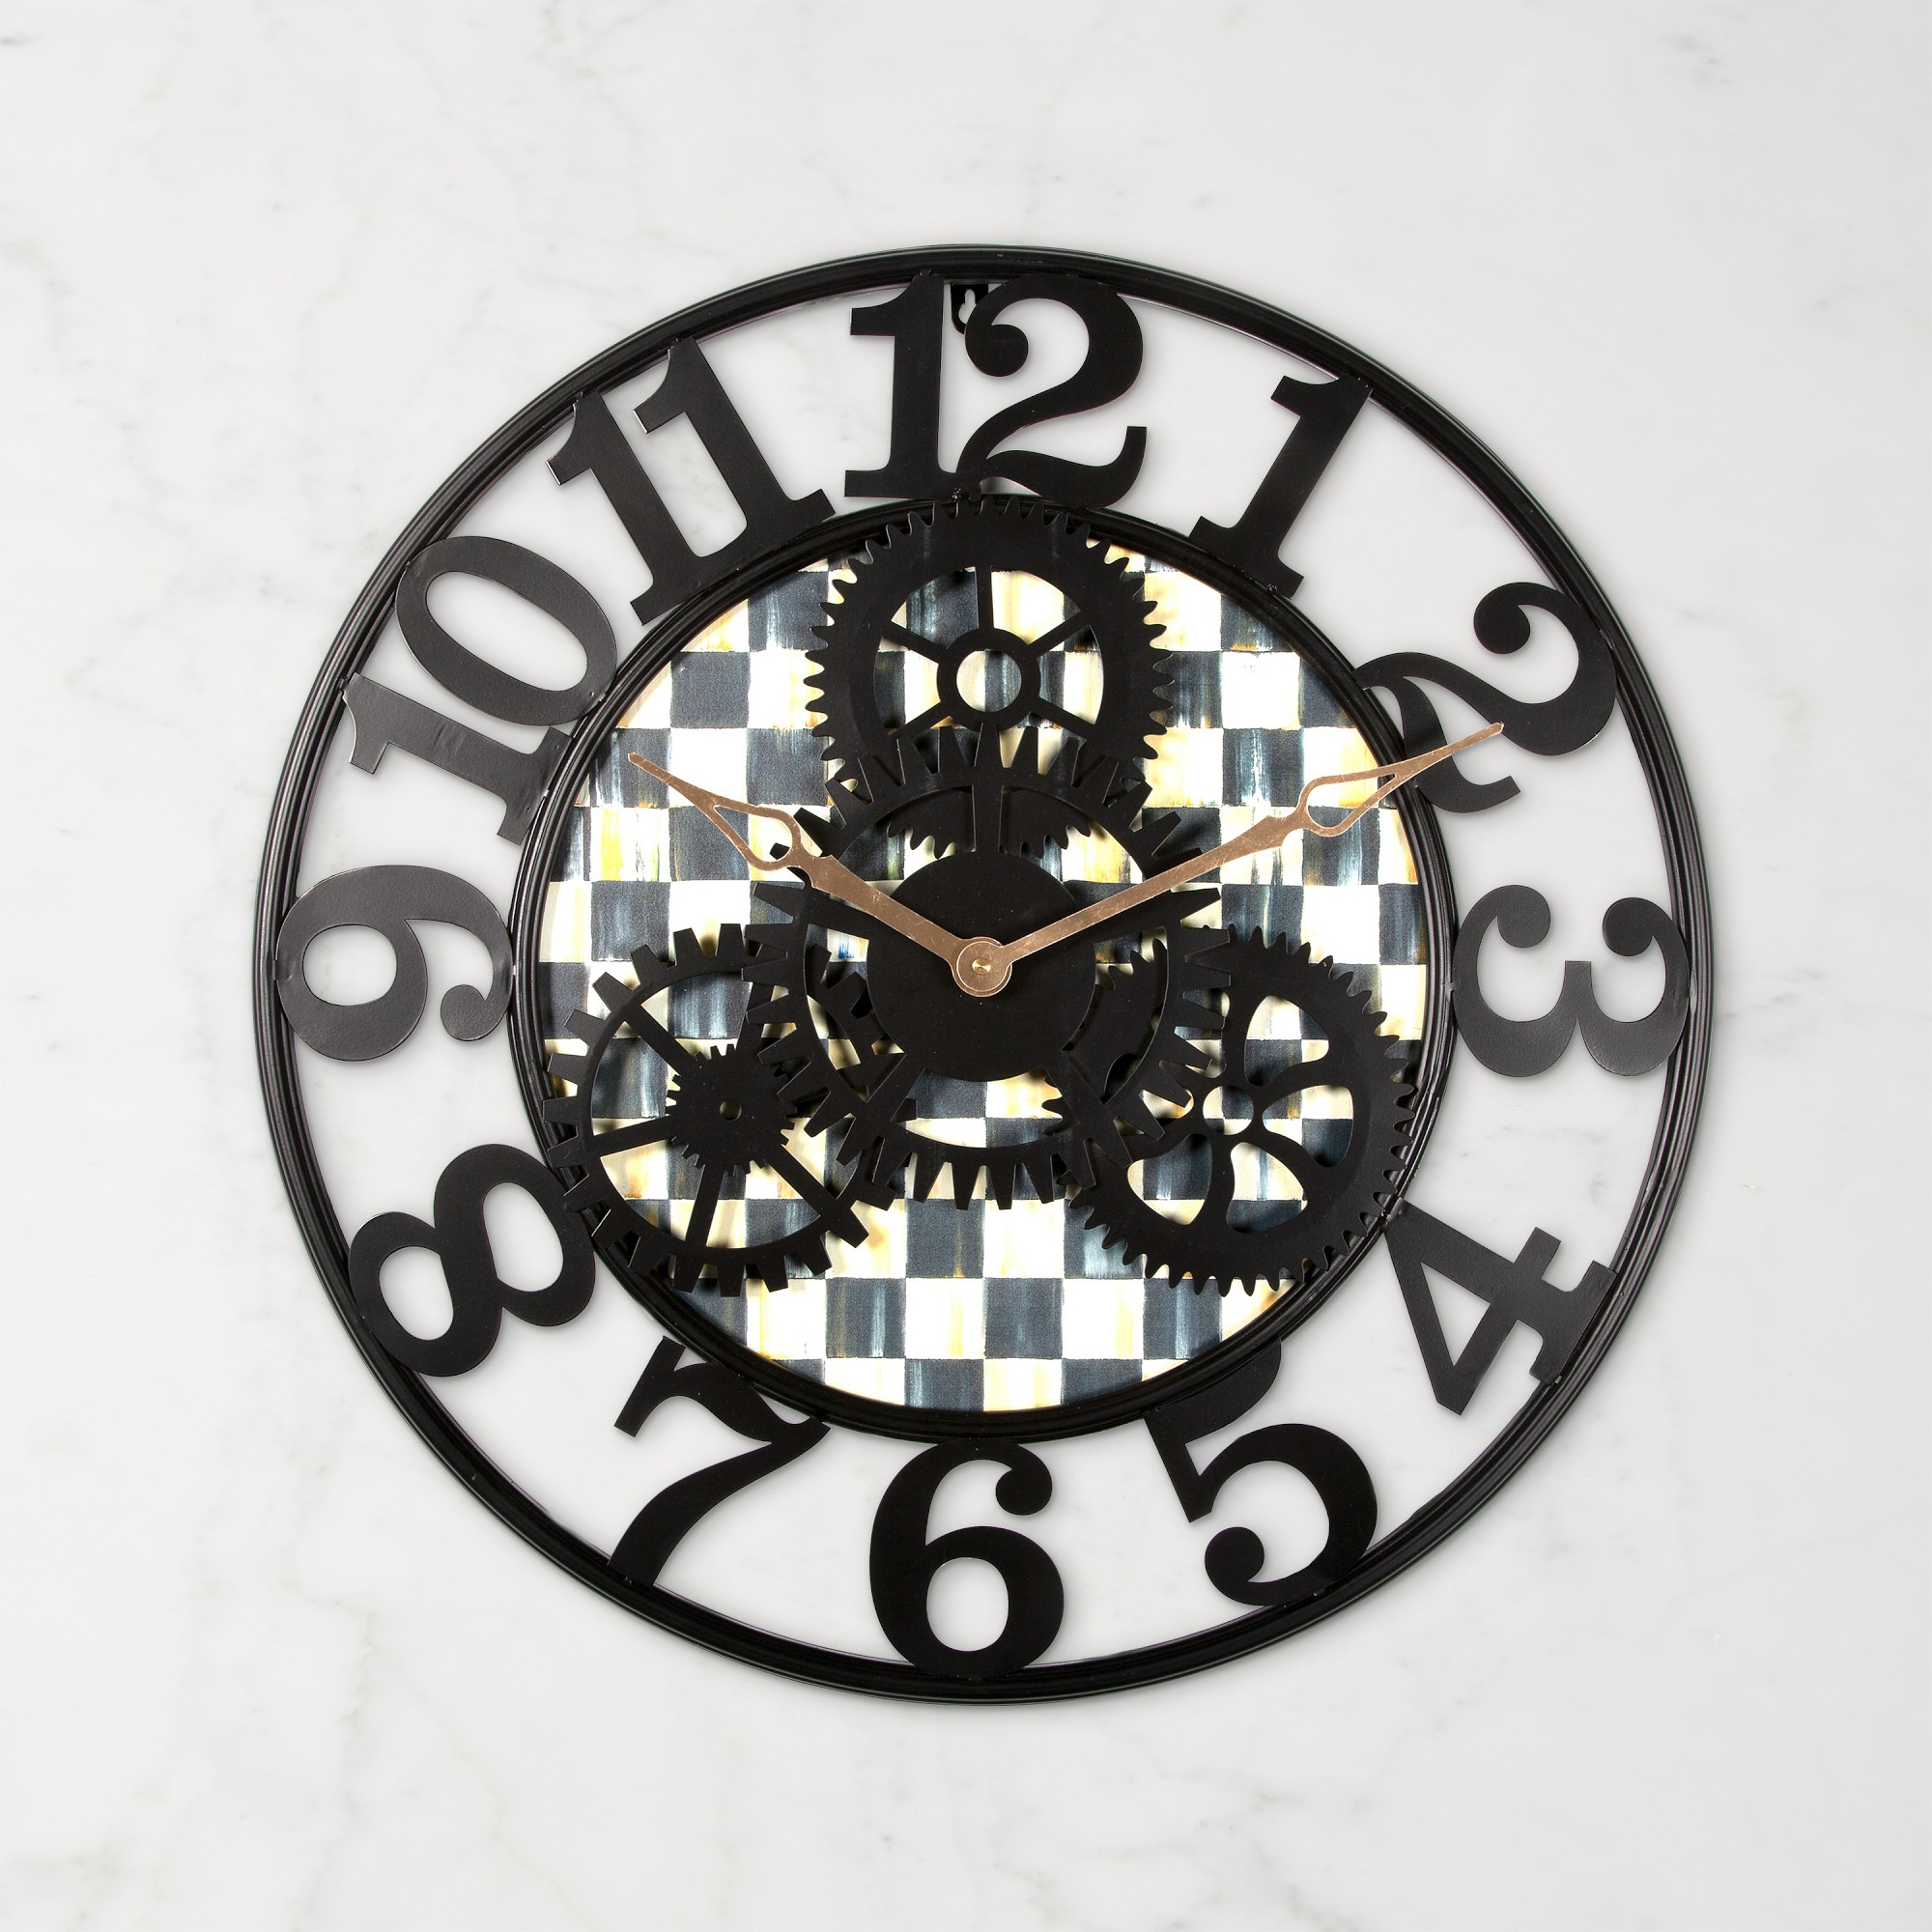 MacKenzie-Childs Courtly Check Farmhouse Wall Clock